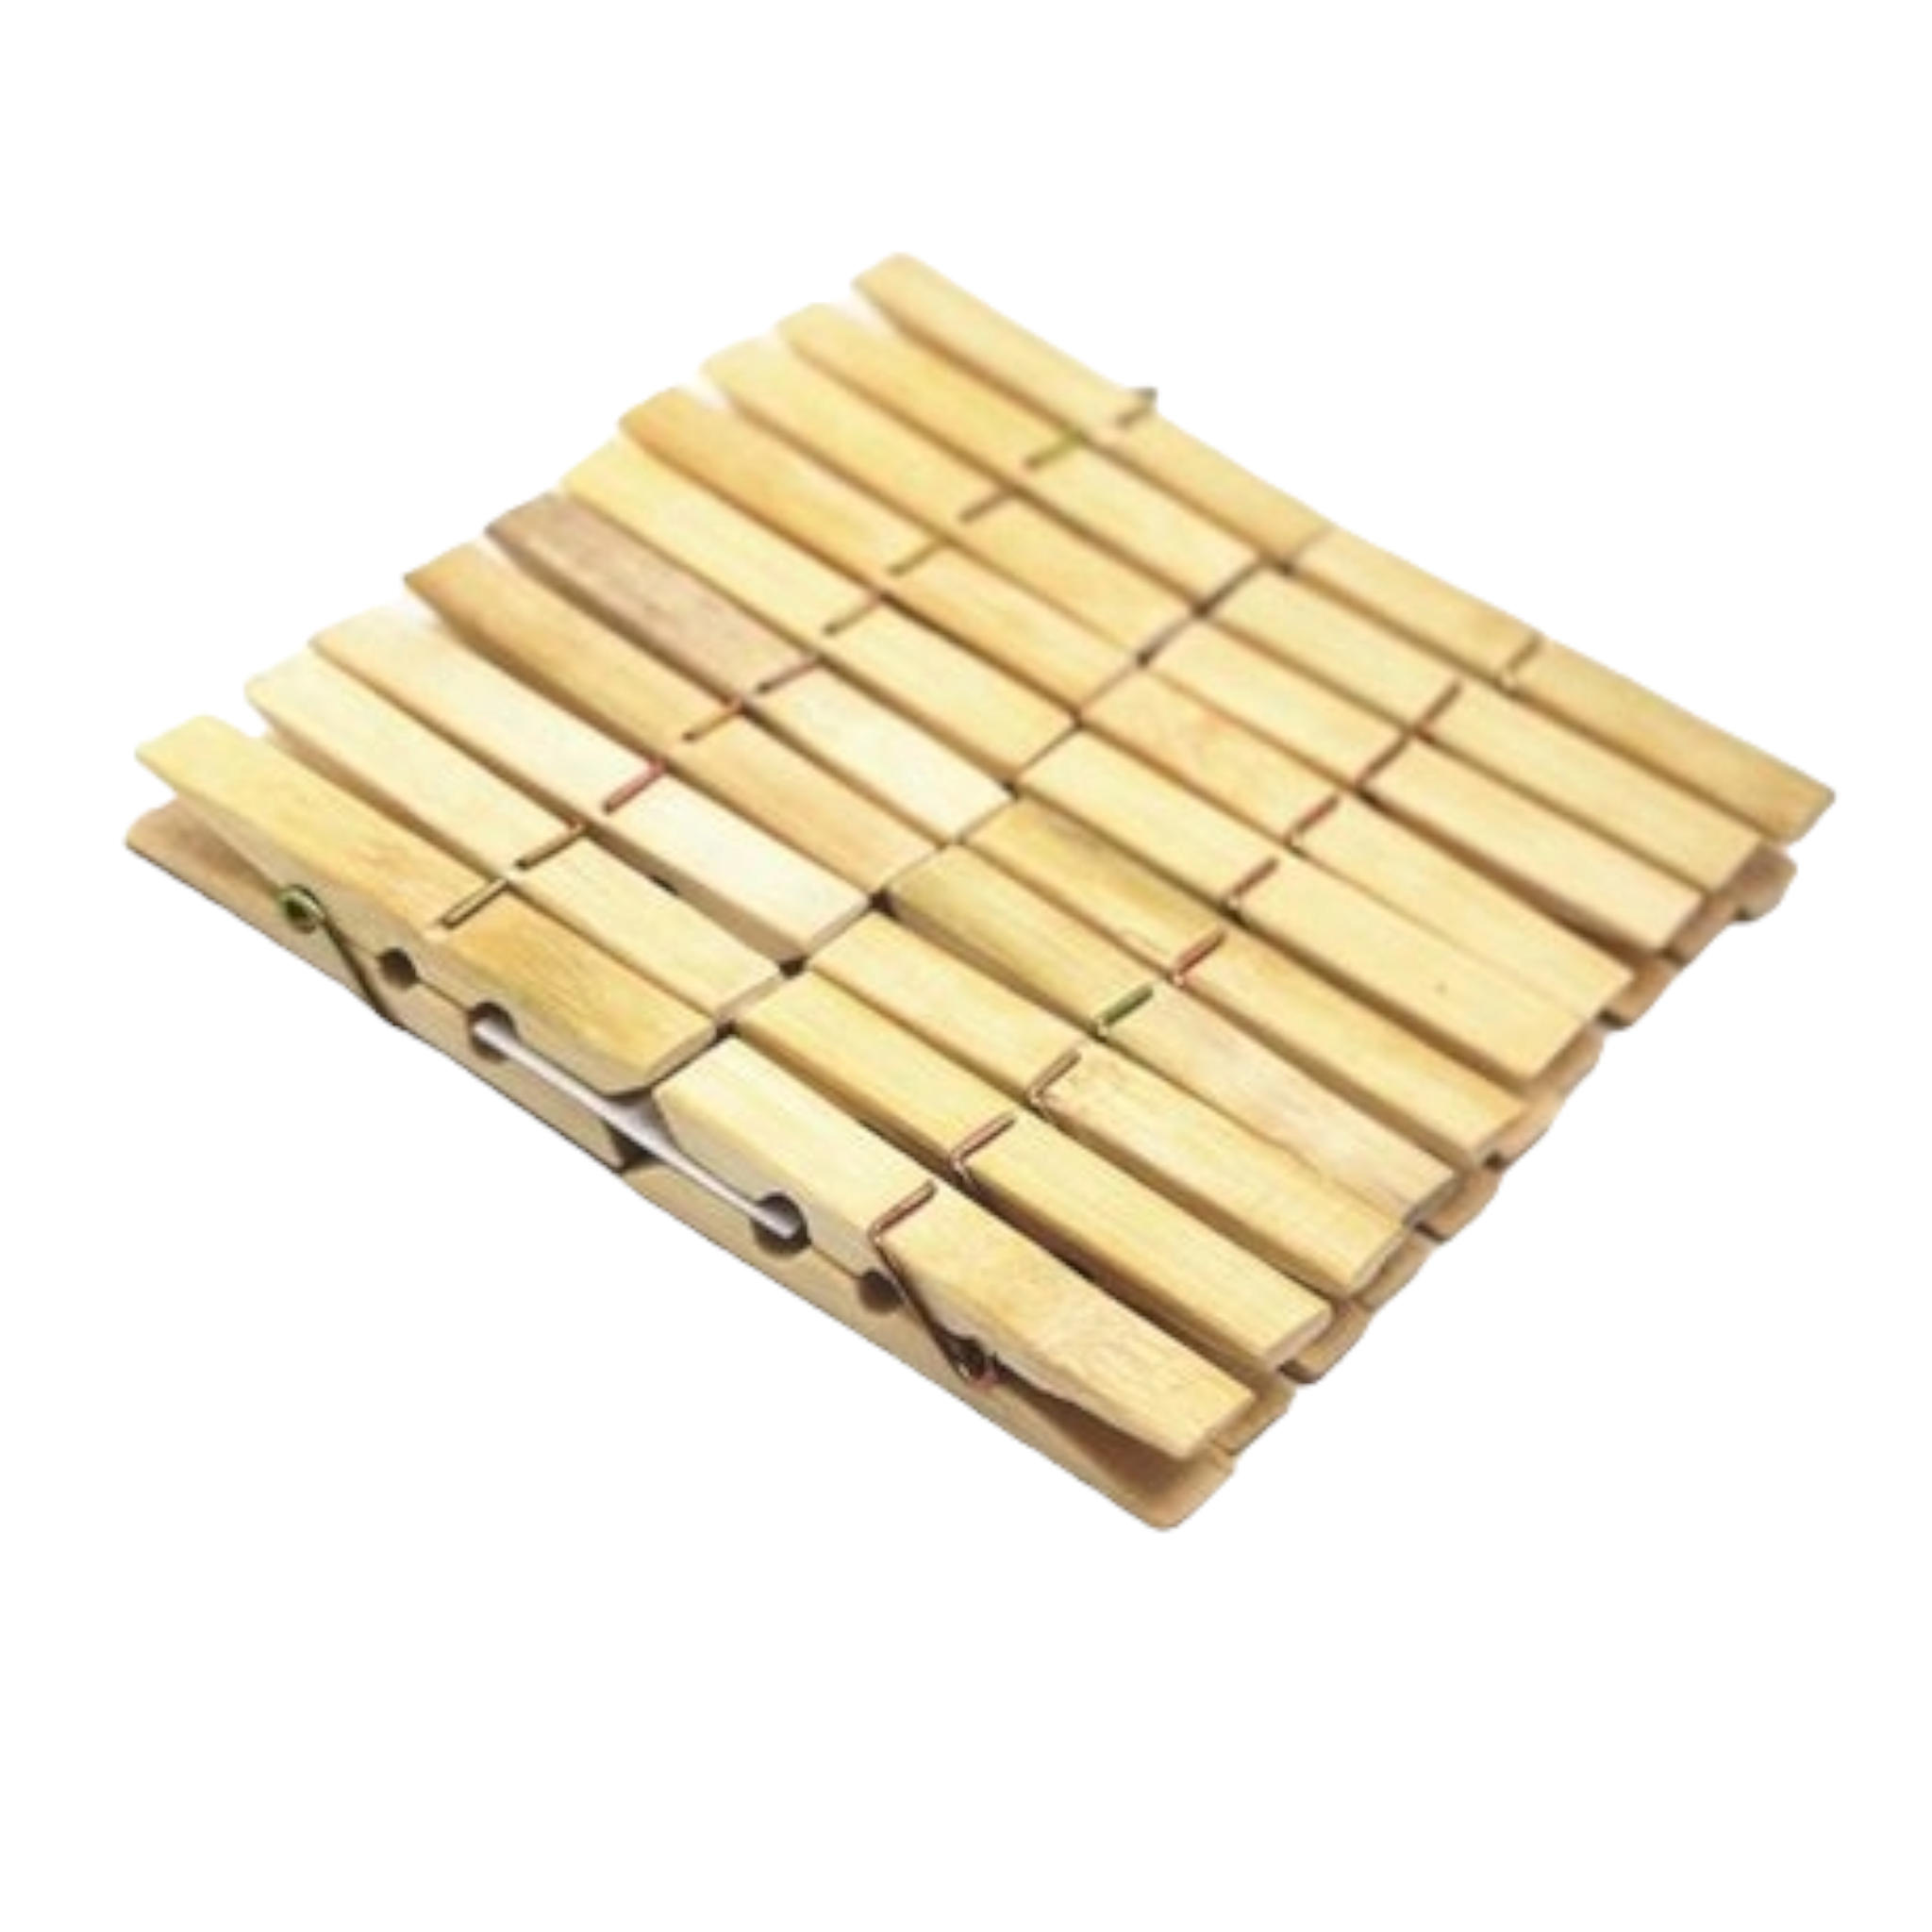 Clothing Pegs Bamboo 20pack